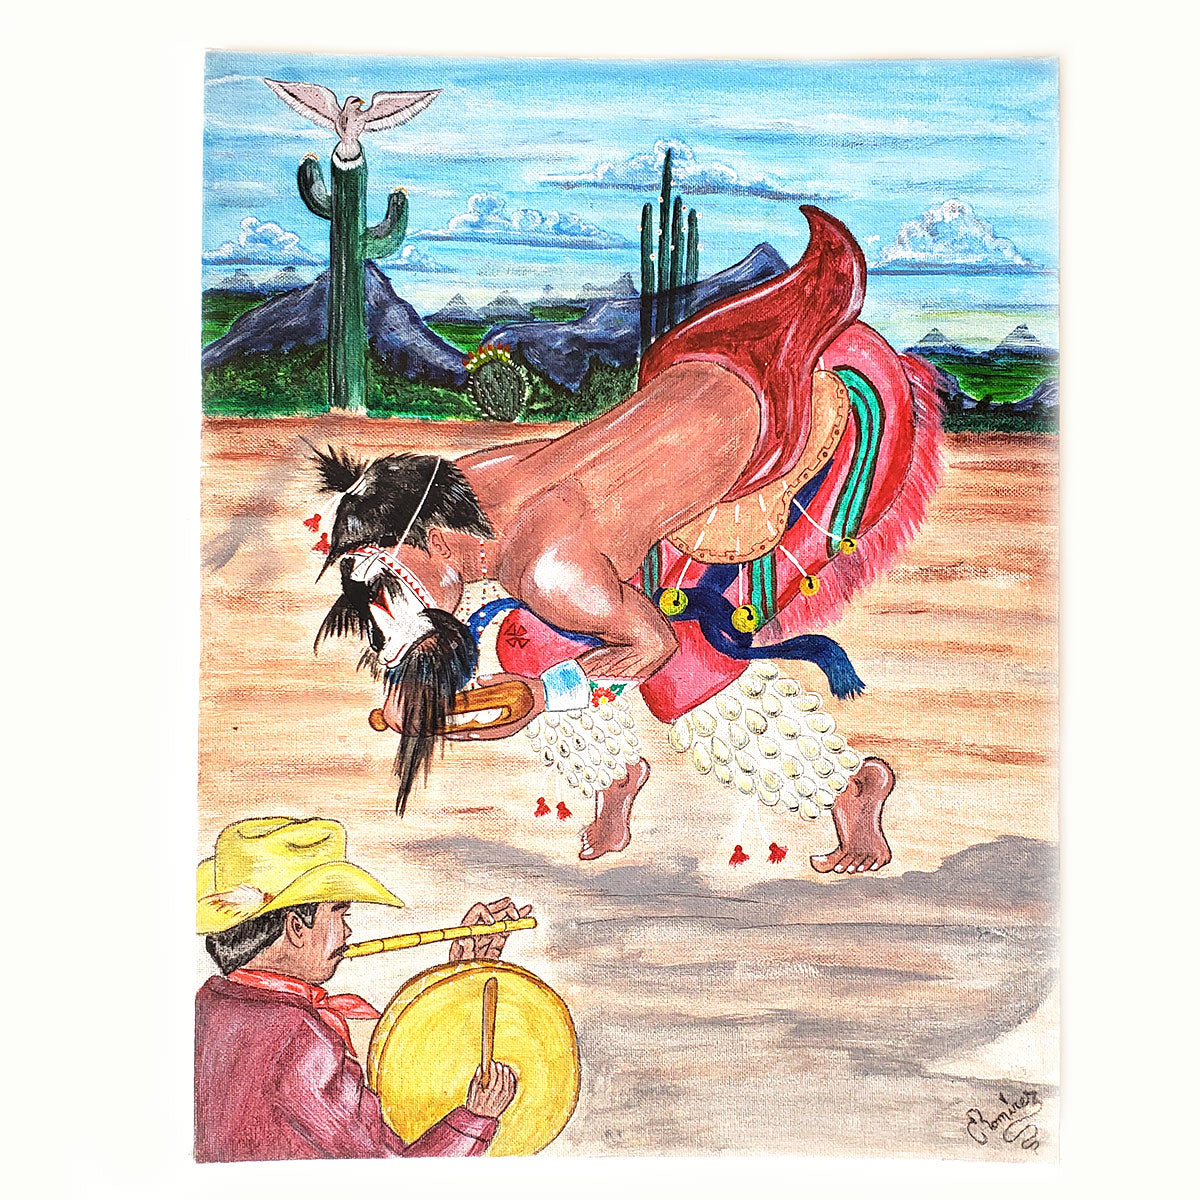 Original Painting - Pascola Dancer with Flute & Drum Player